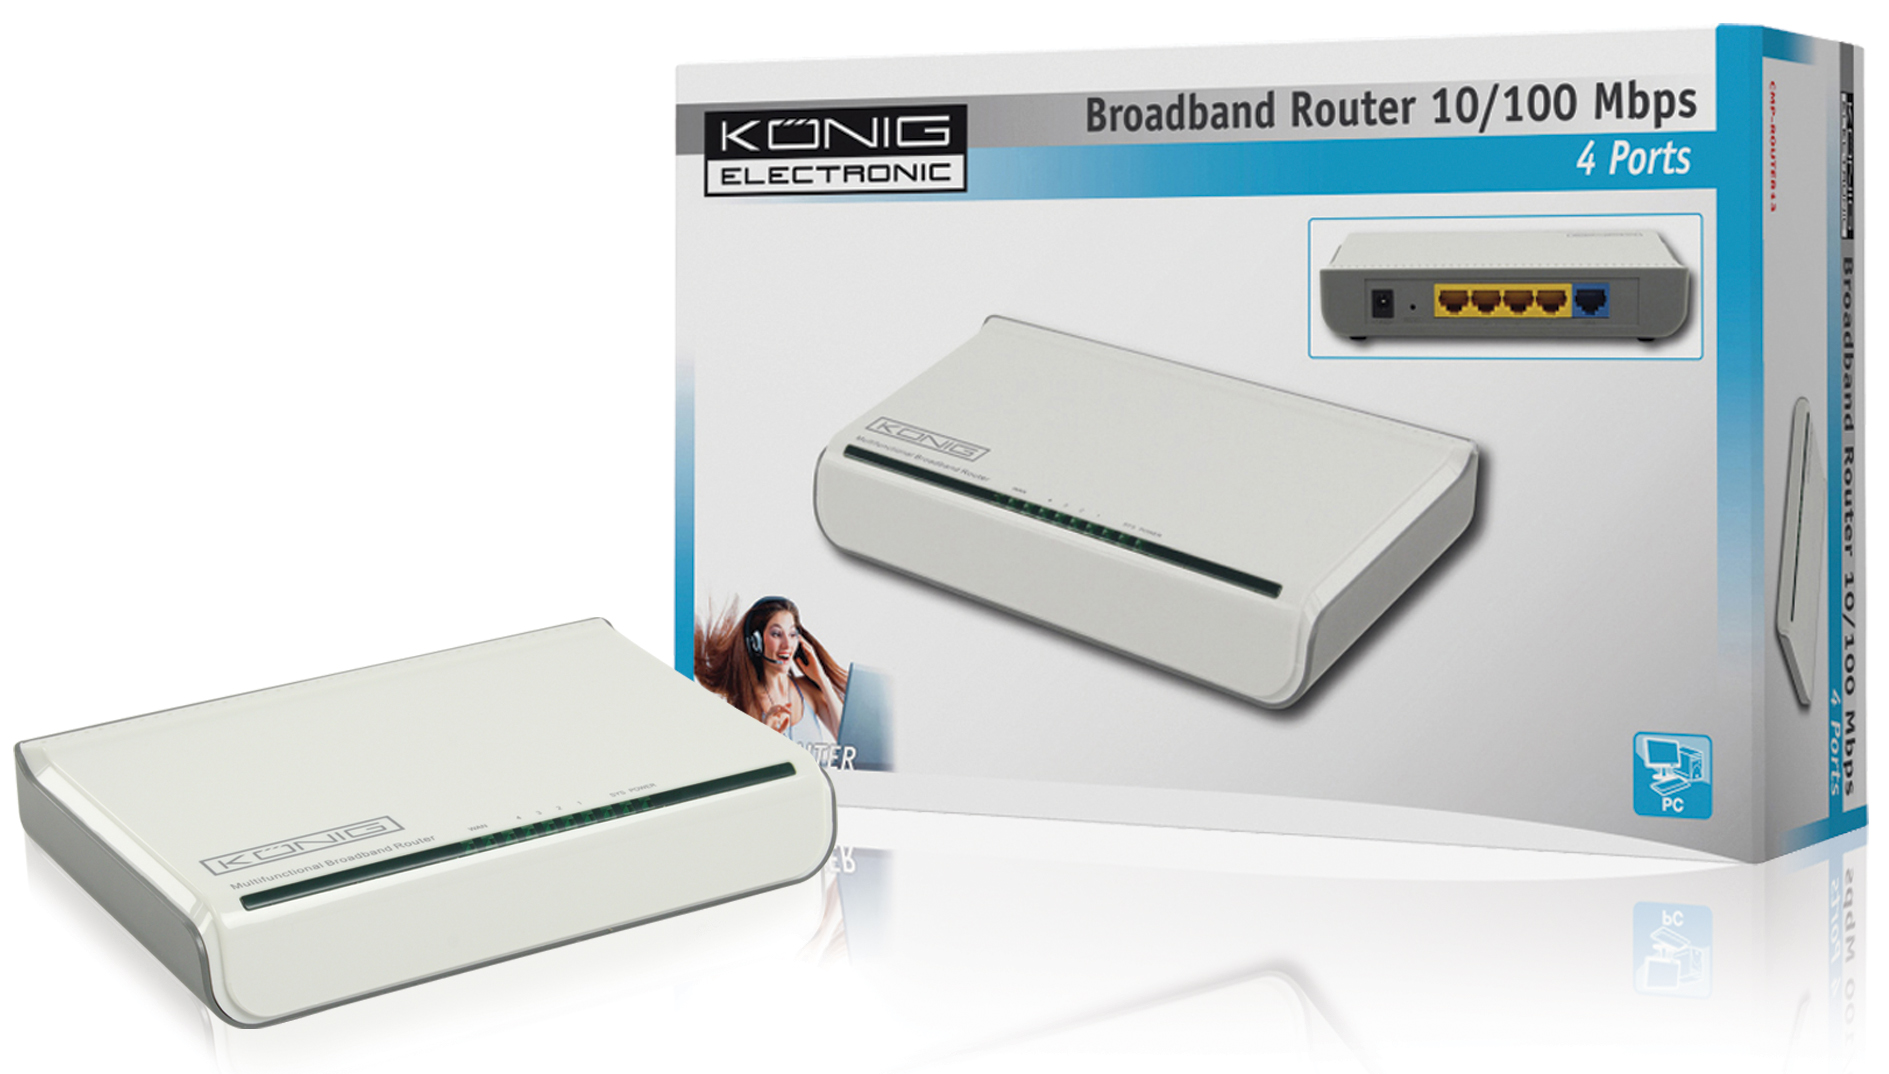 One Day Price - 4-poorts router breedband